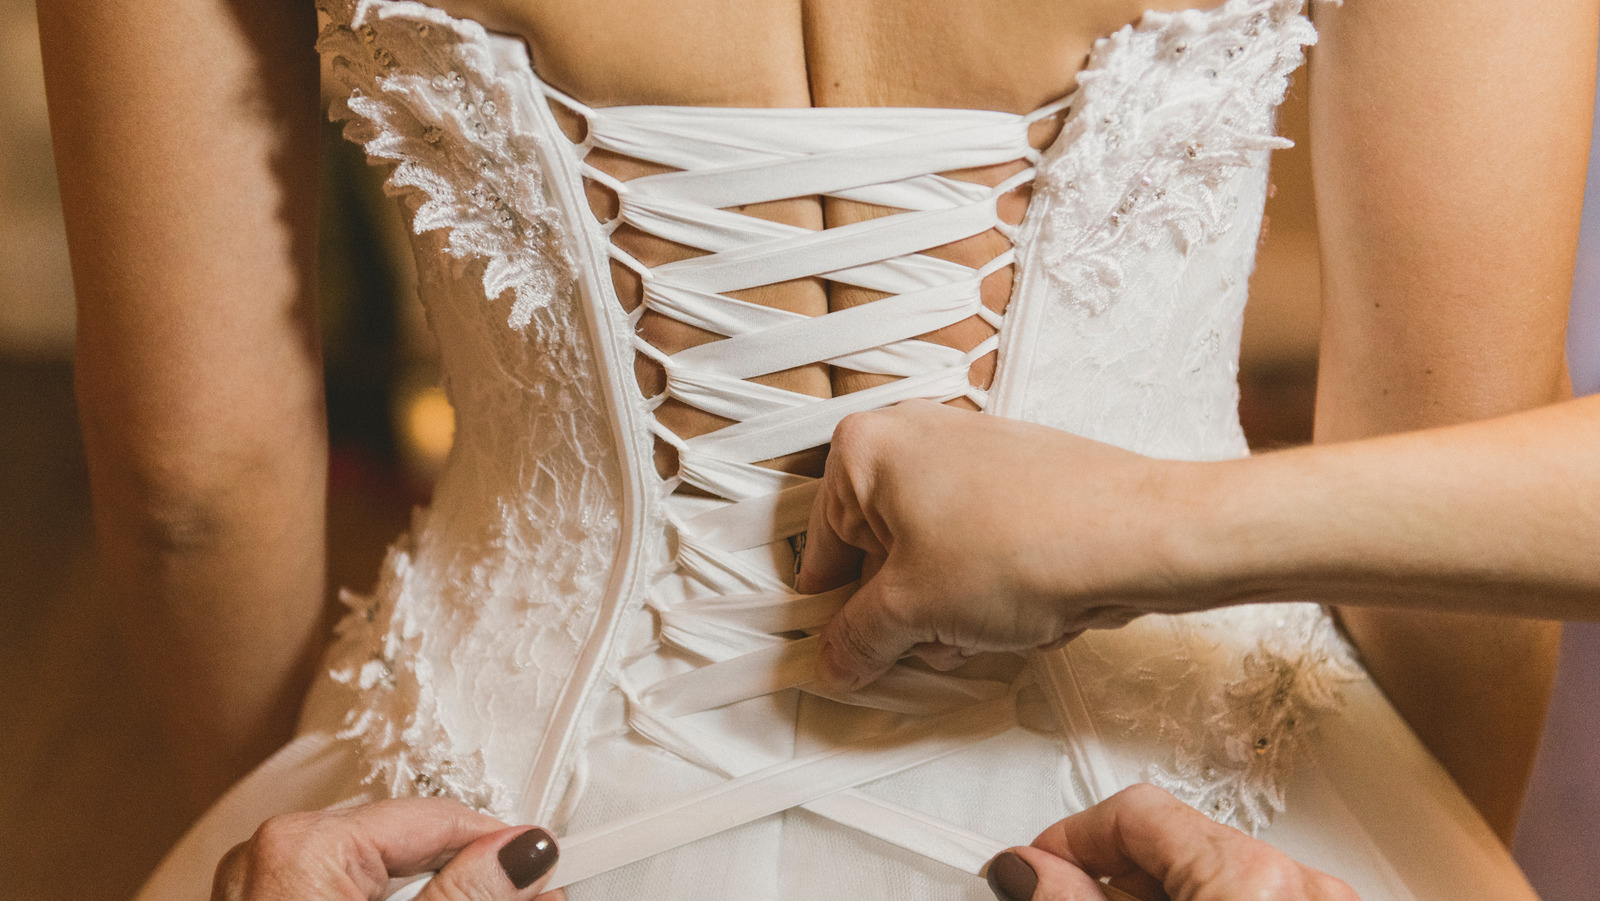 The History Of Wearing Corsets And Their Troubling Side Effects